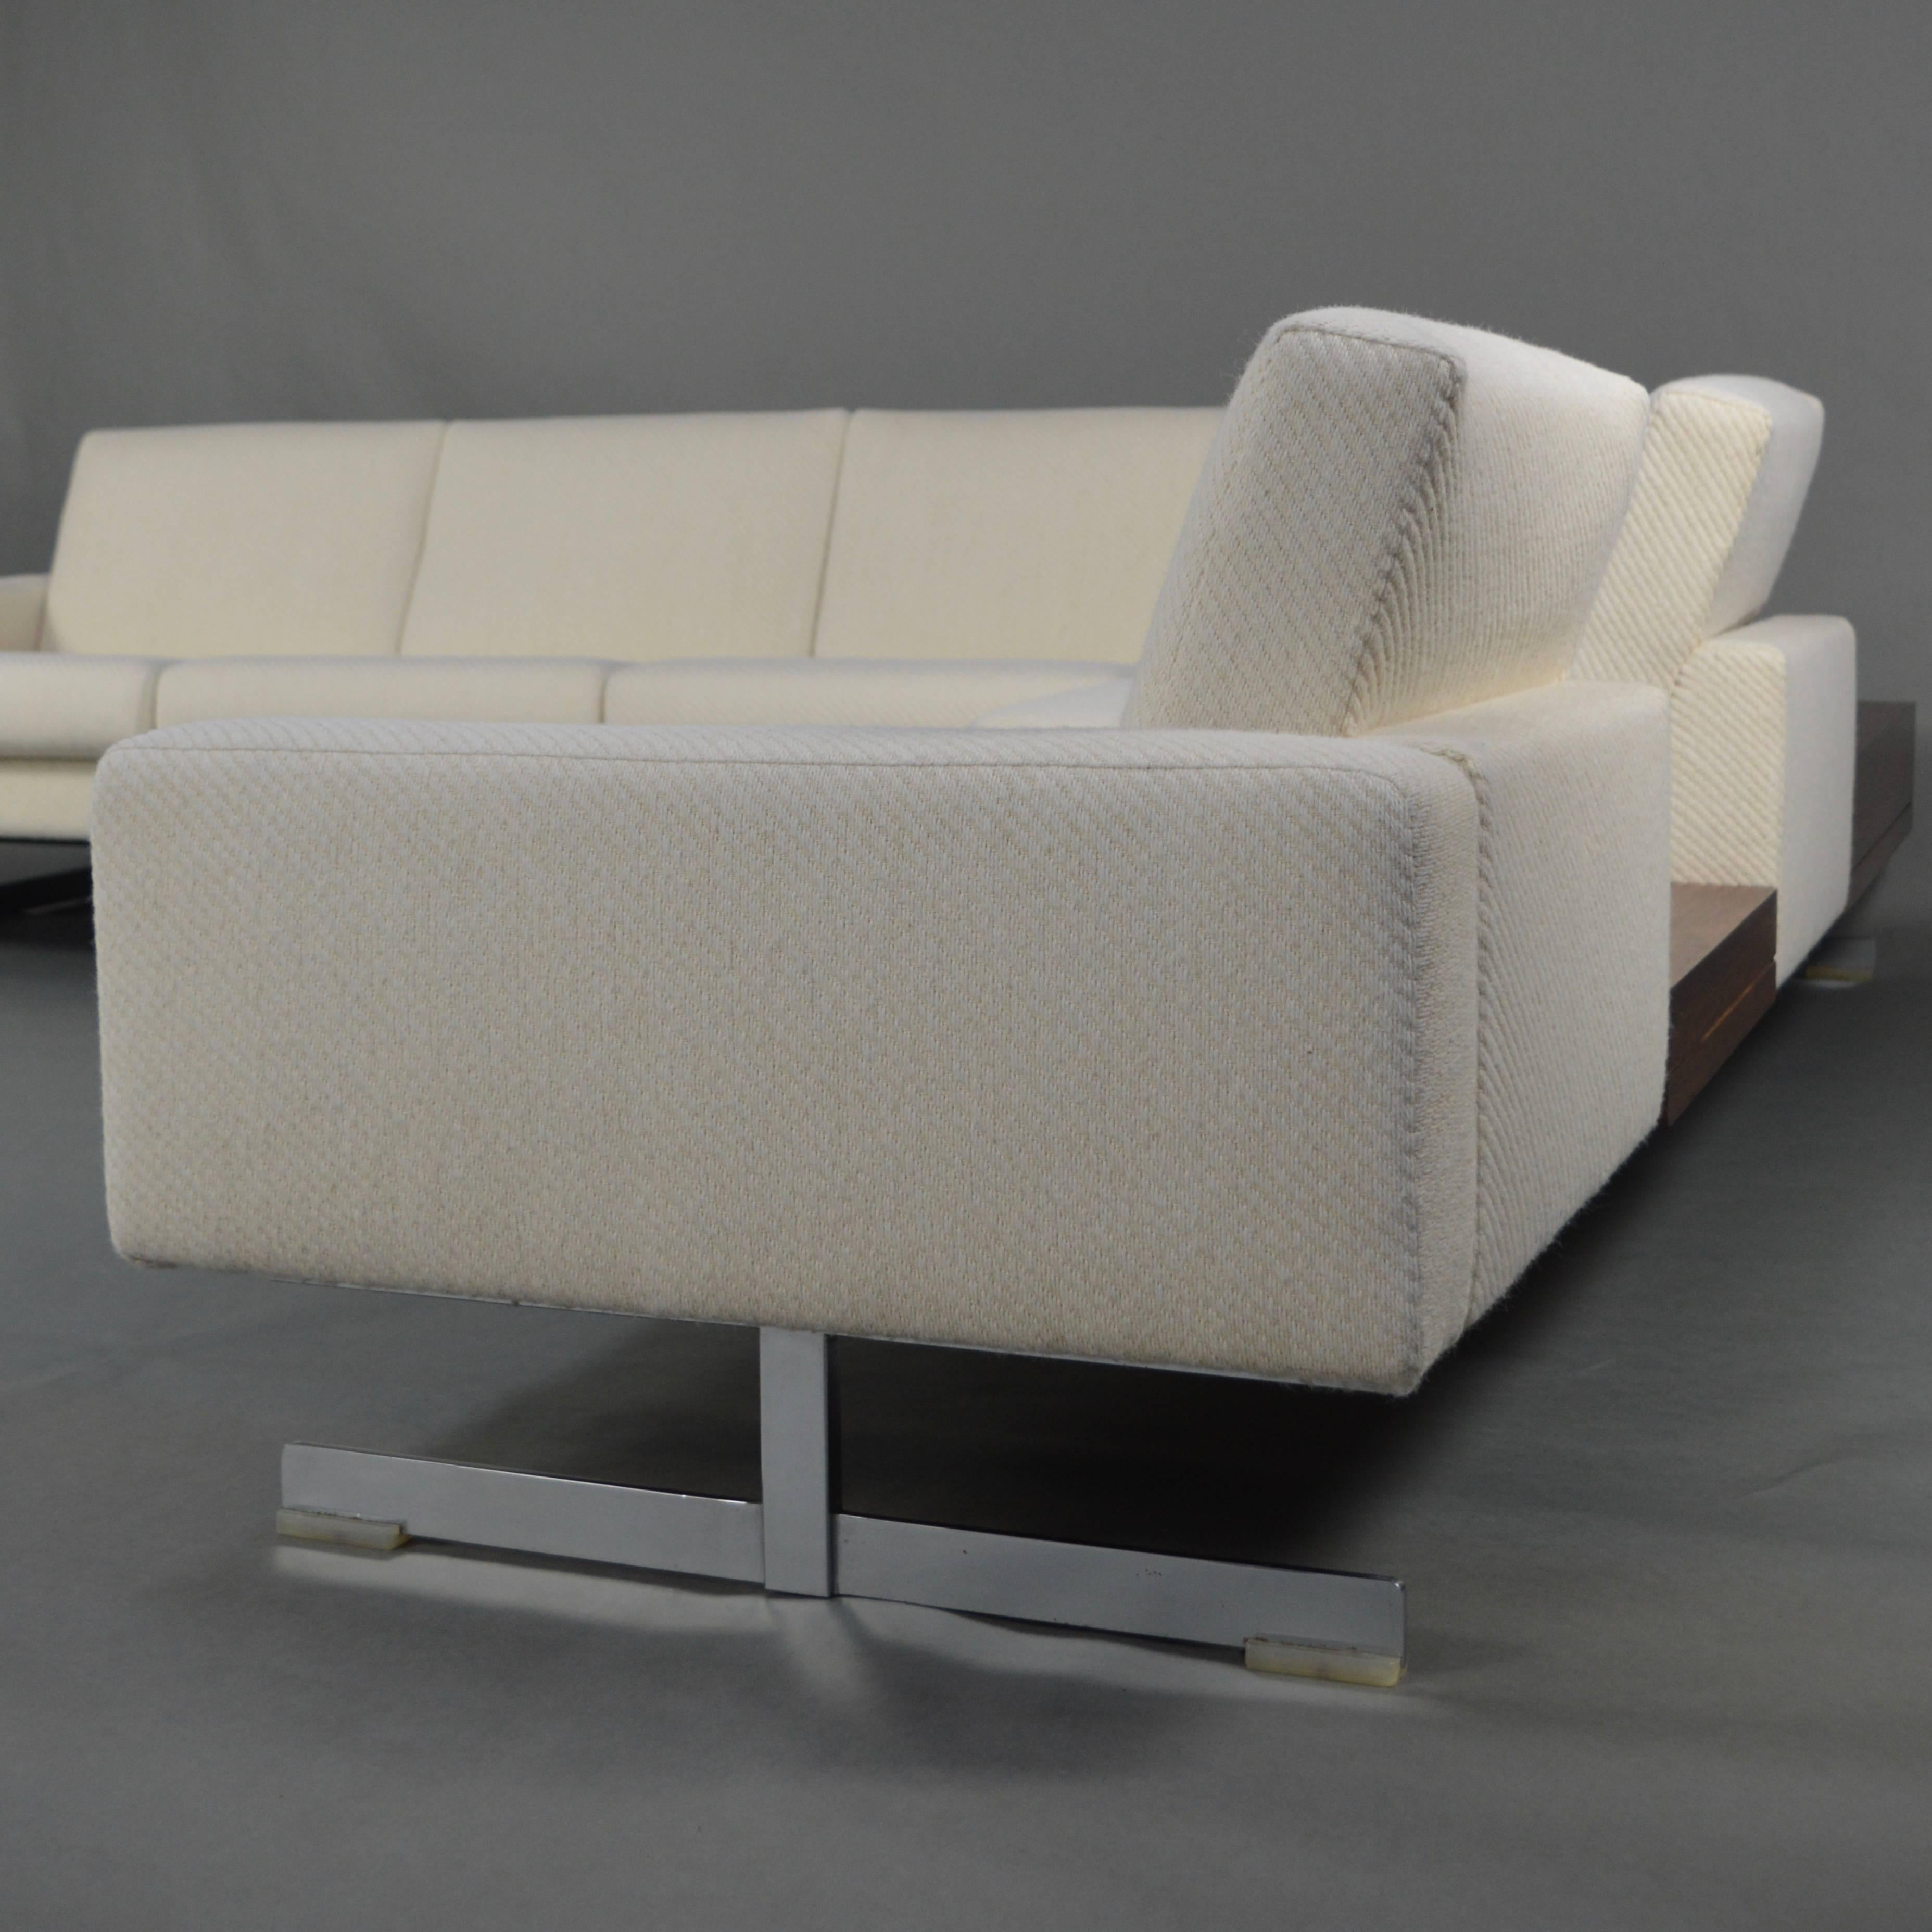 Rolf Benz 1st Edition Pluraform Sofa with Rosewood Coffee Tables, 1964 2